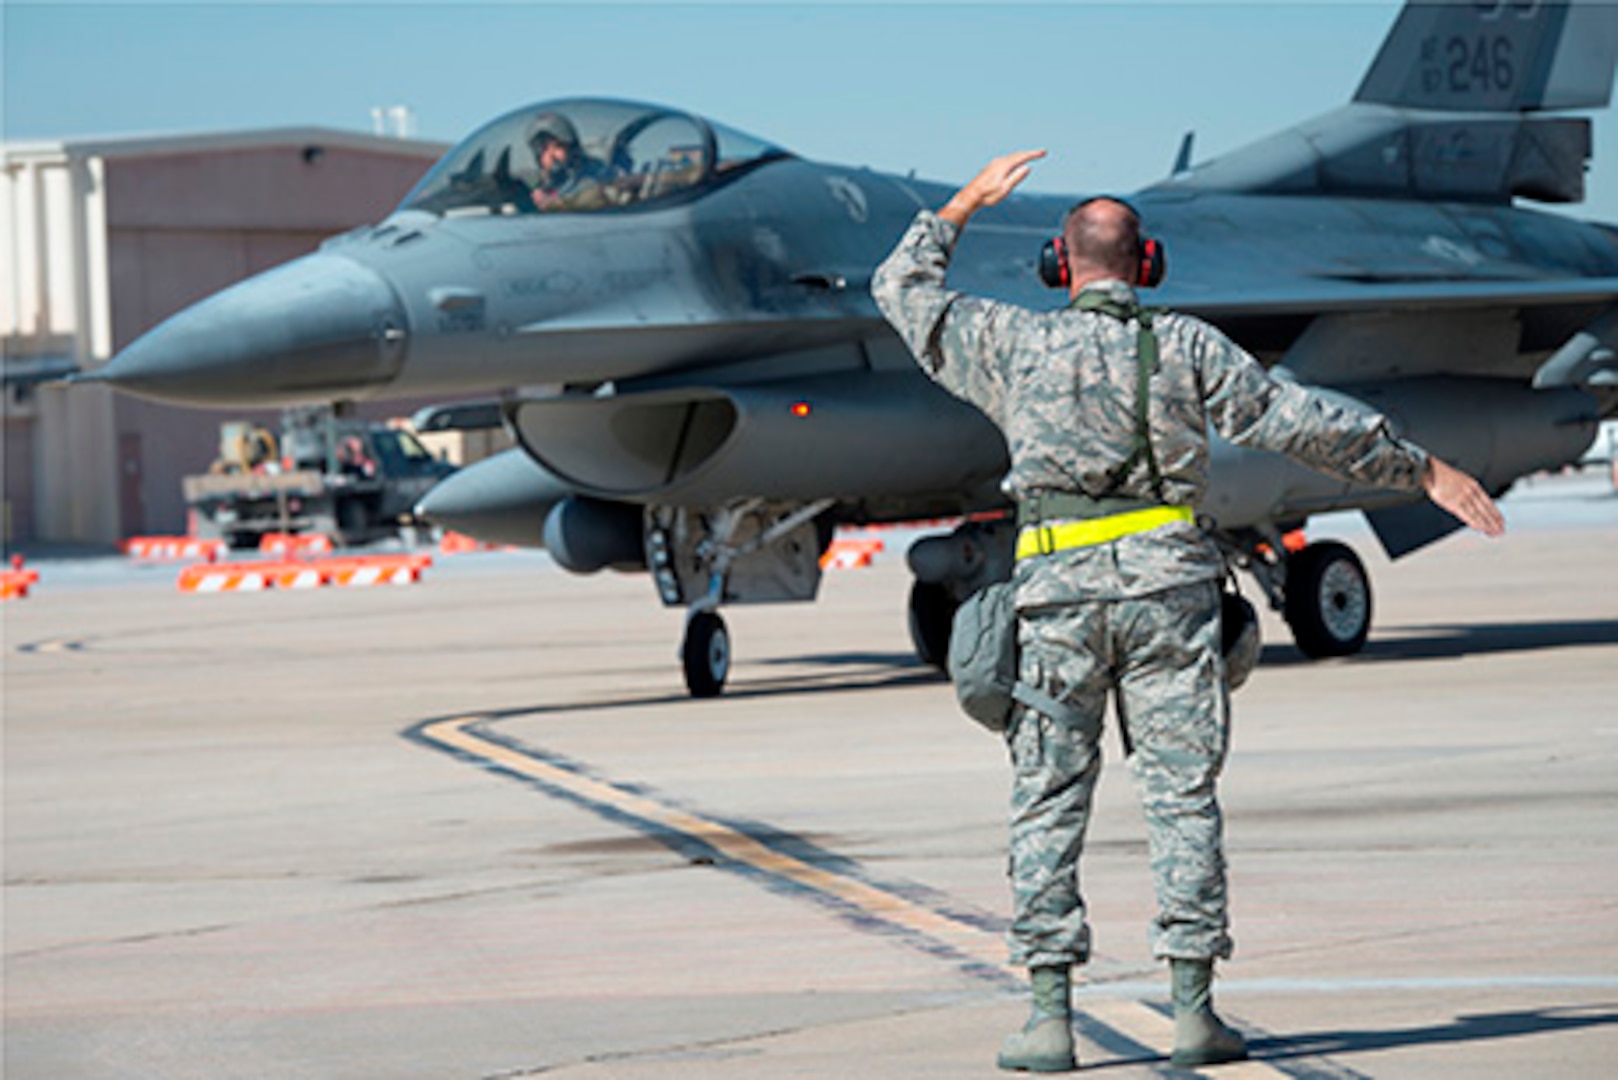 ​U.S. Air Force Tech. Sgt. Robbin Bruning, 140th Maintenance Squadron, Colorado Air National Guard, ushers in an F-16 Fighting Falcon during the wing’s readiness inspection at Buckley Air Force Base, Aurora, Colo., Oct. 16, 2015. This training is a part of the 140th Wing’s four-day Wing Wartime Readiness Inspection, the U.S. Air Force’s new evaluation system for wartime, contingency and force sustainment readiness. (U.S. Air National Guard photo by Tech. Sgt. Wolfram M. Stumpf)